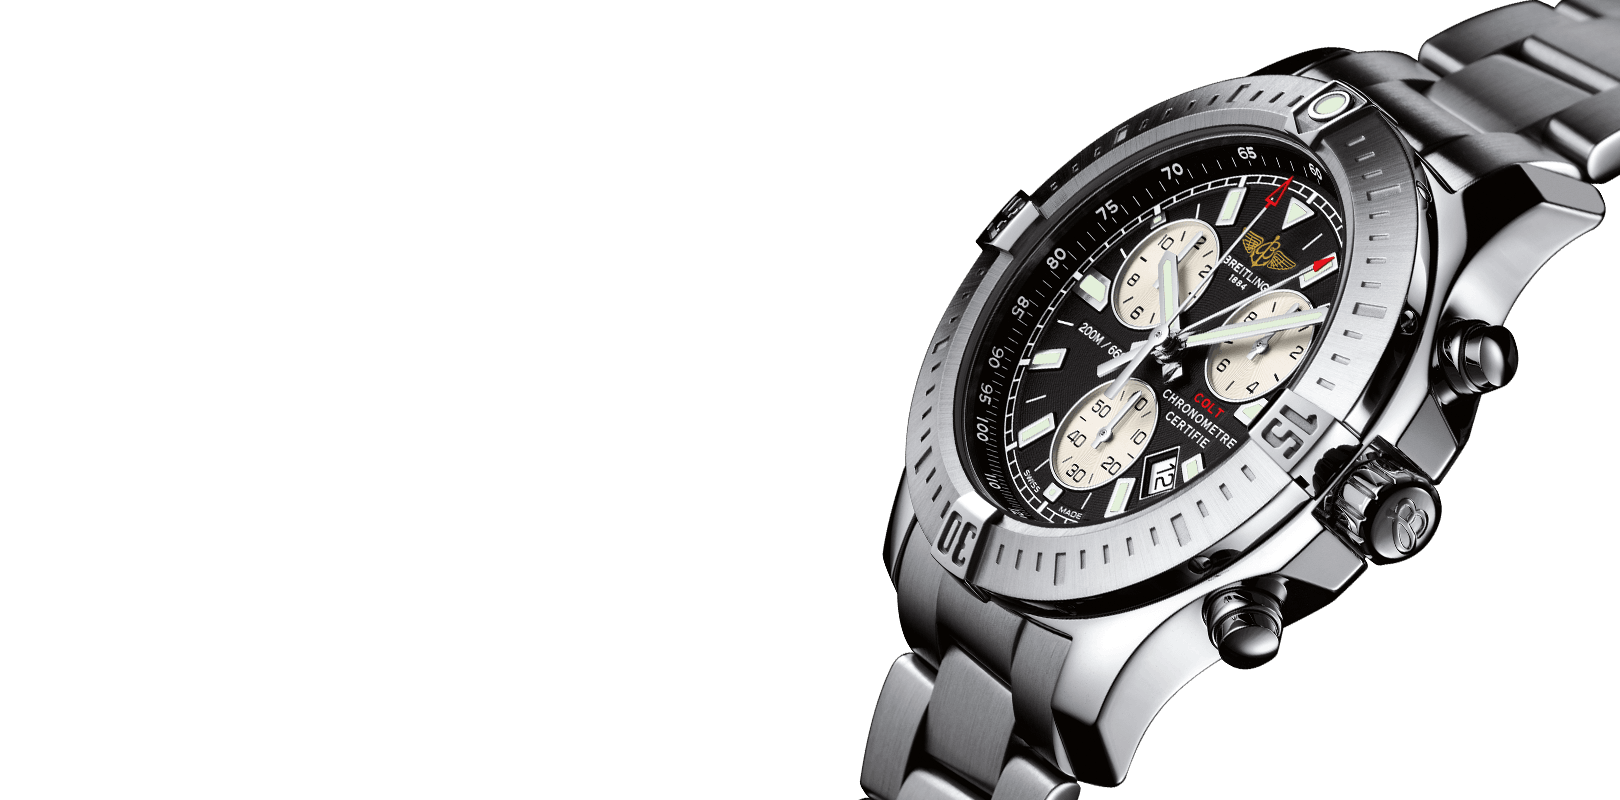 Breitling Super Avengers timed A13970breitling Super Avengers timed limited edition M13370 48mm black PVD steel is rare